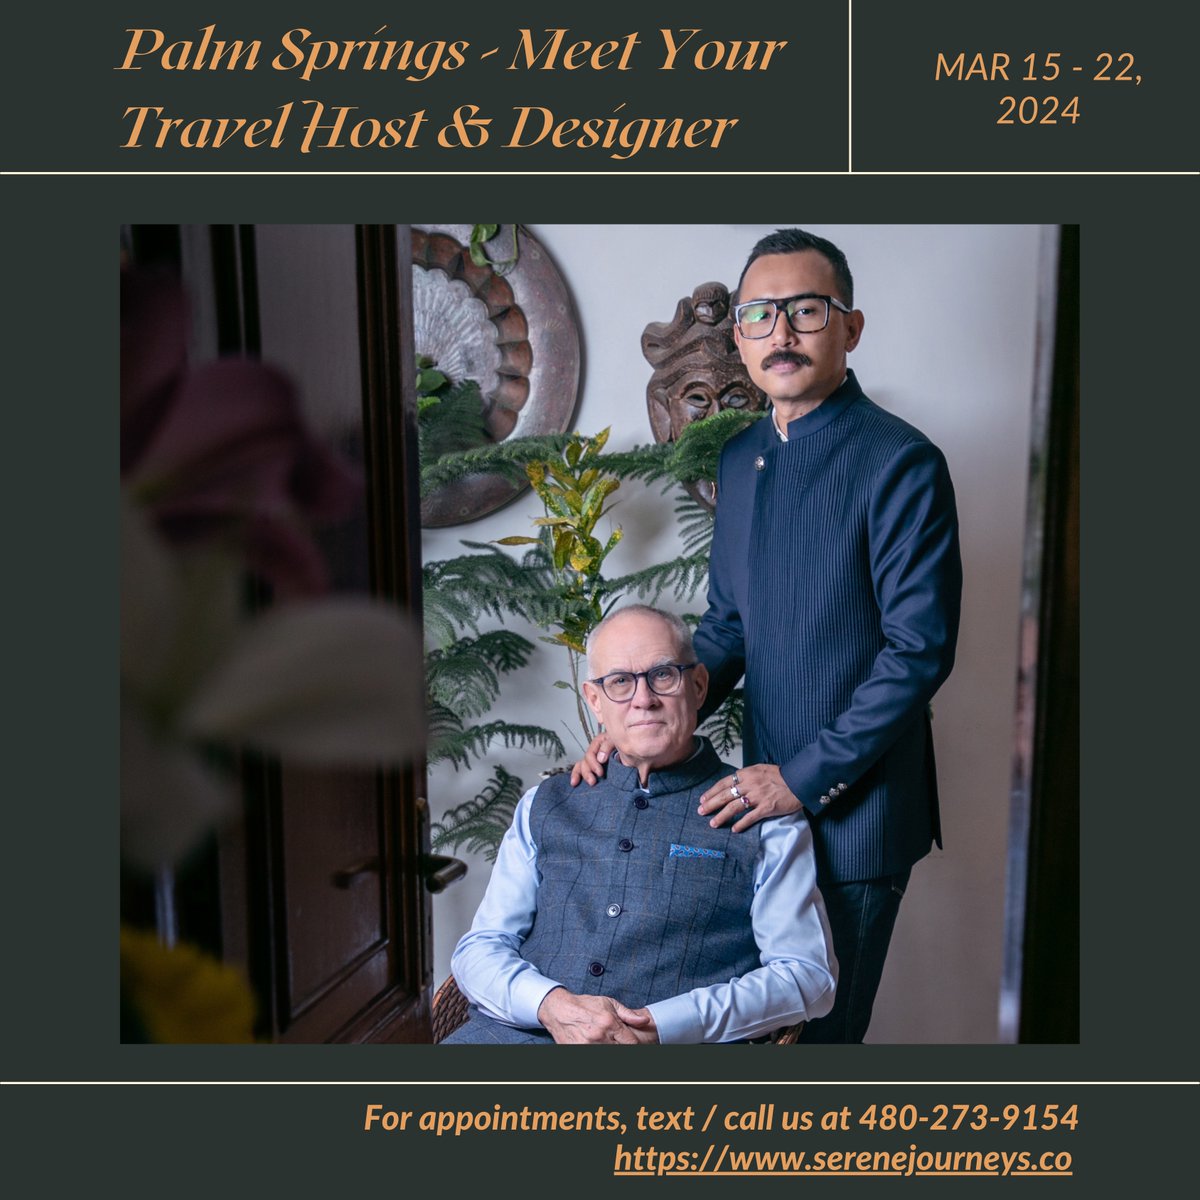 Hello #PalmSprings! We're thrilled to announce the return of our exciting travel chat and cocktails event. Join us for a week-long extravaganza from March 15-22, 2024. Simply reach out to us via call or text to secure your exclusive spot. Our event will take place at various